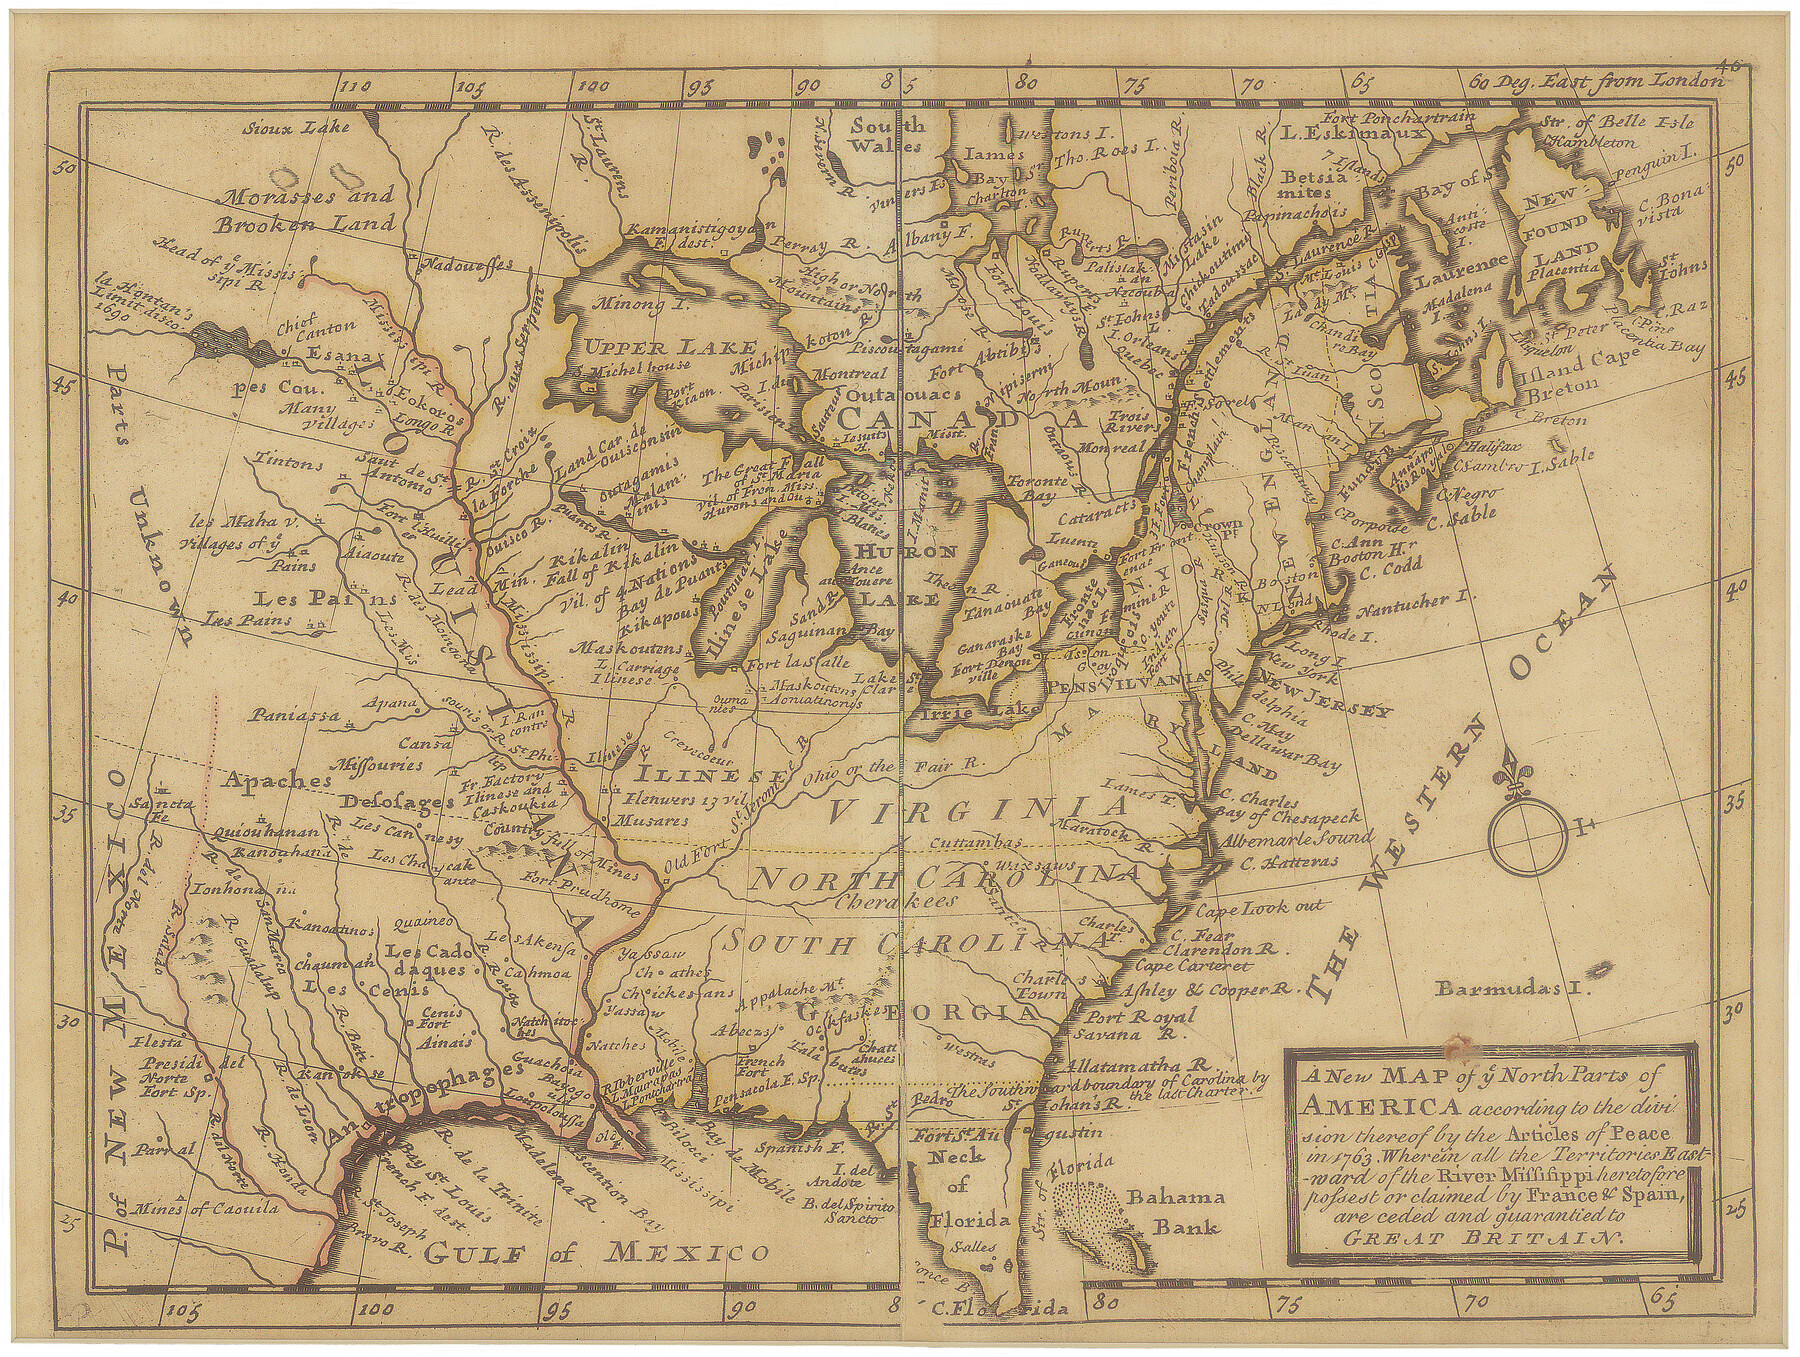 95280, A New Map of ye North Parts of America according to the division thereof by the Articles of Peace in 1763, Non-GLO Digital Images